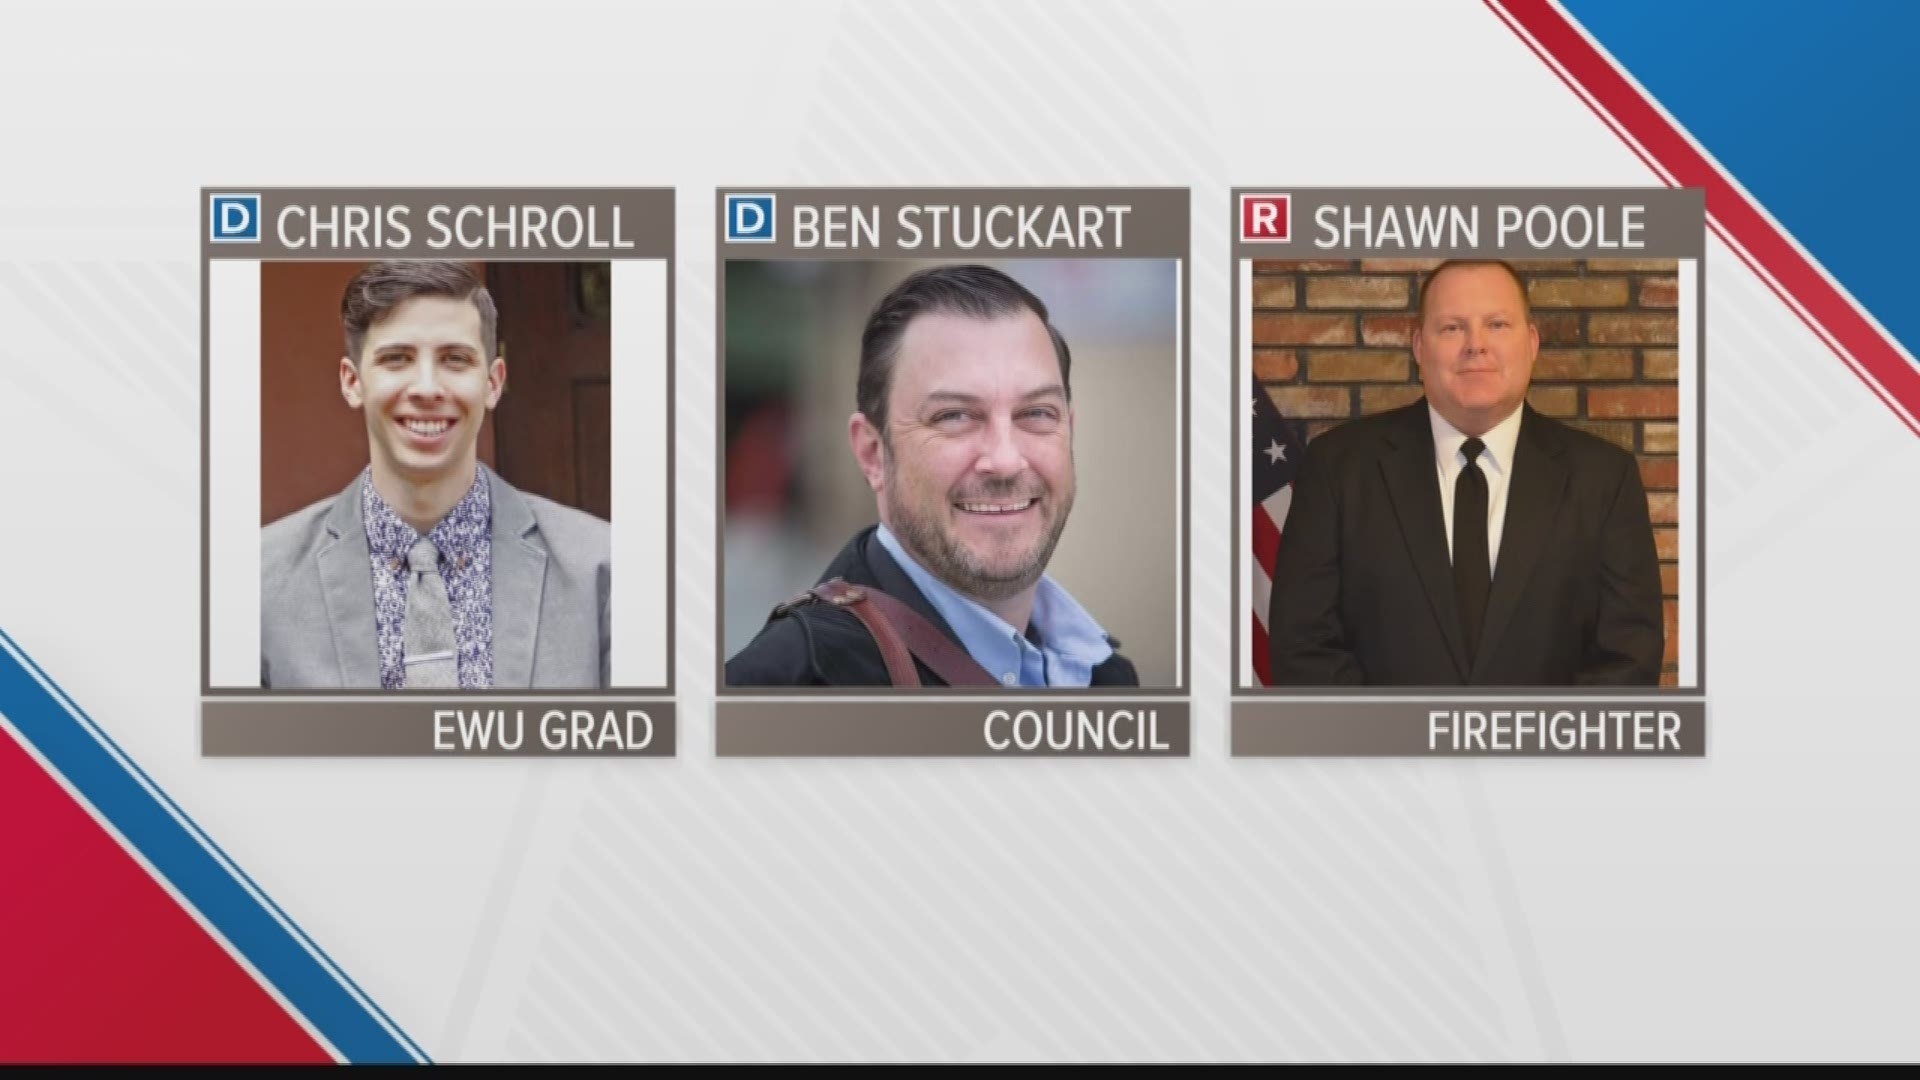 Next year will play host to the race for mayor of Spokane. Three candidates are currently in the mix: Ben Stuckart, Chris Schroll, and Shawn Poole.